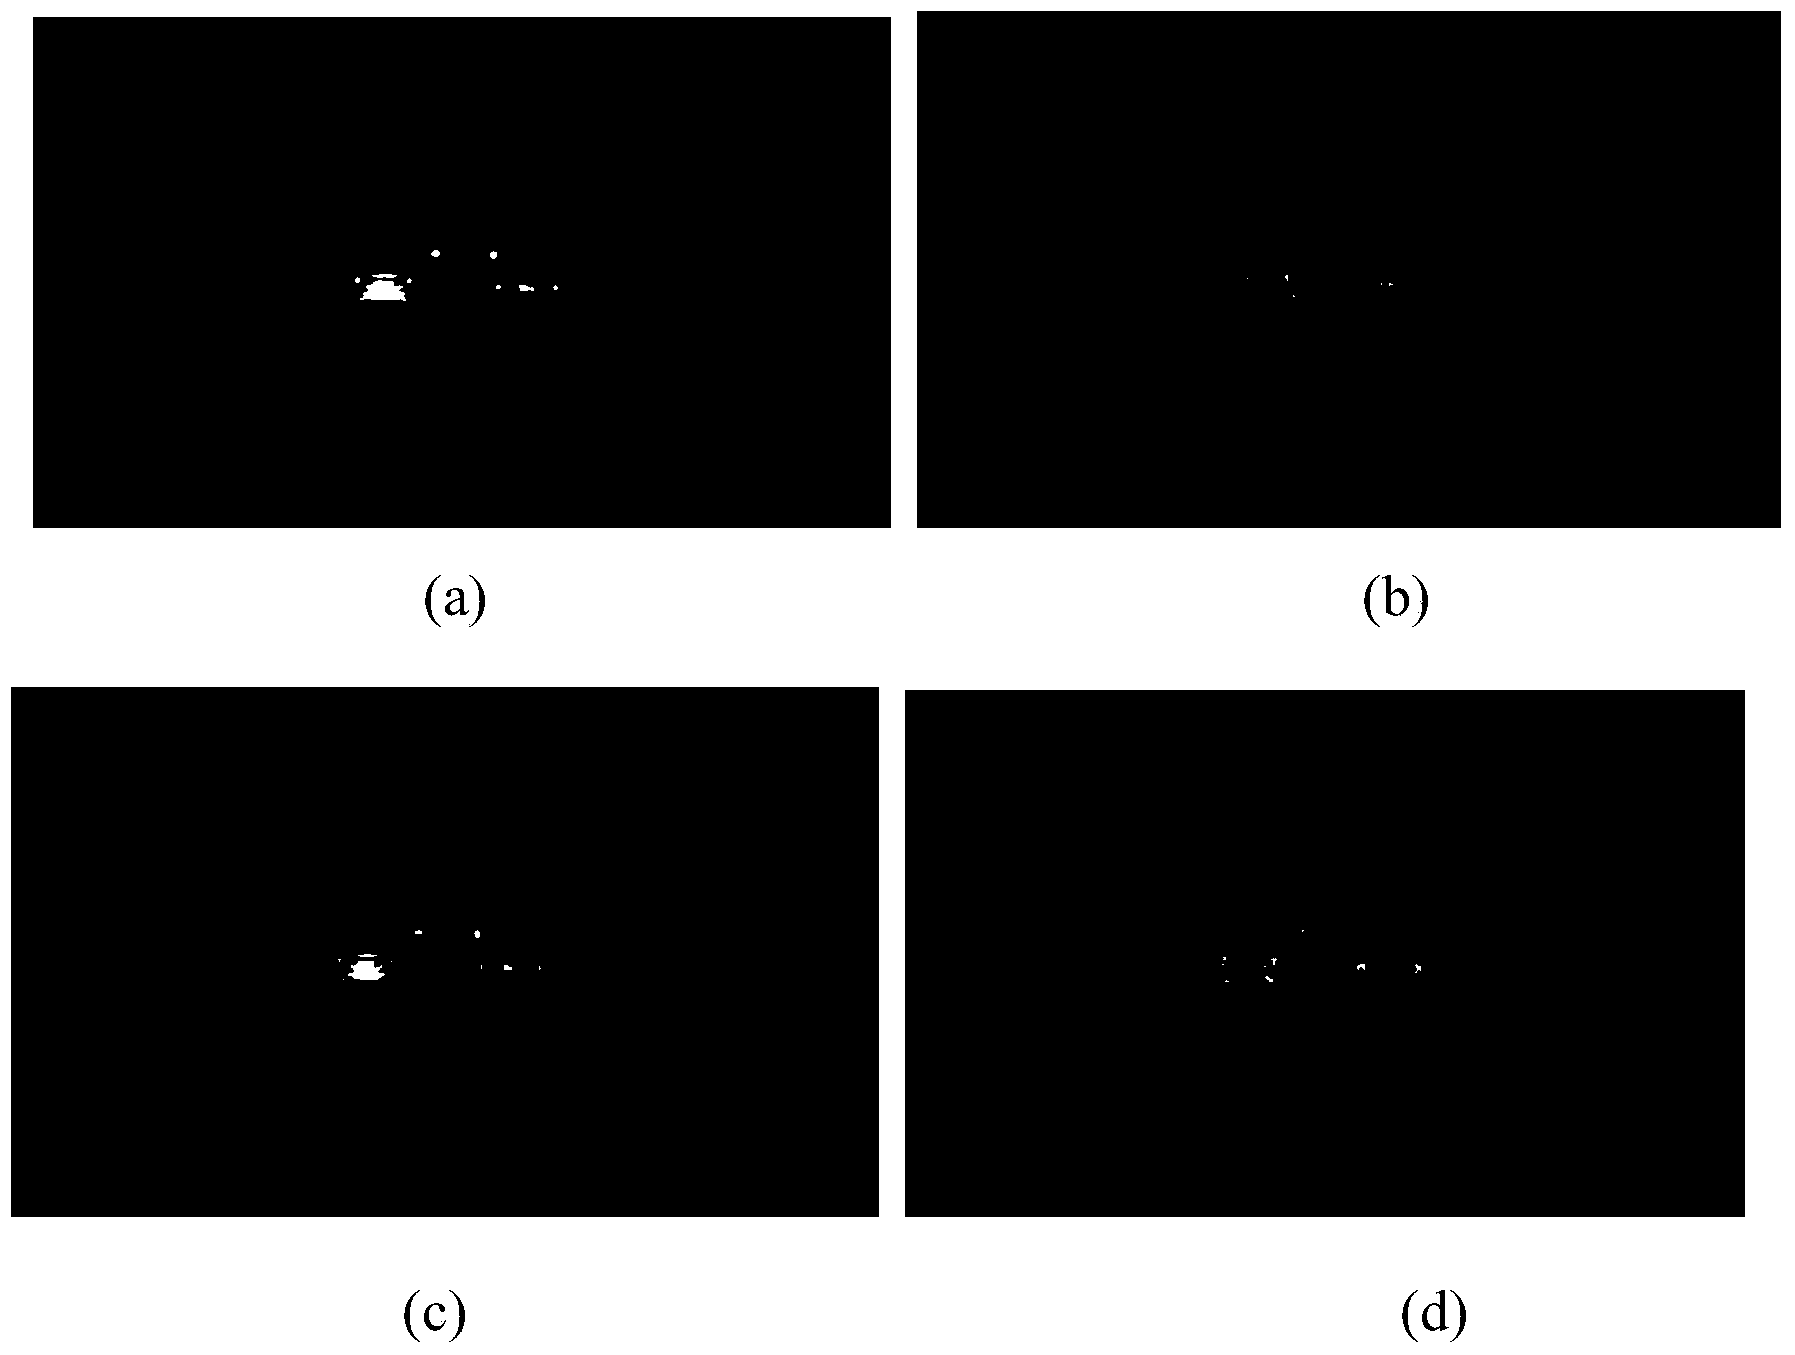 Multi-feature nighttime vehicle detection method based on machine vision